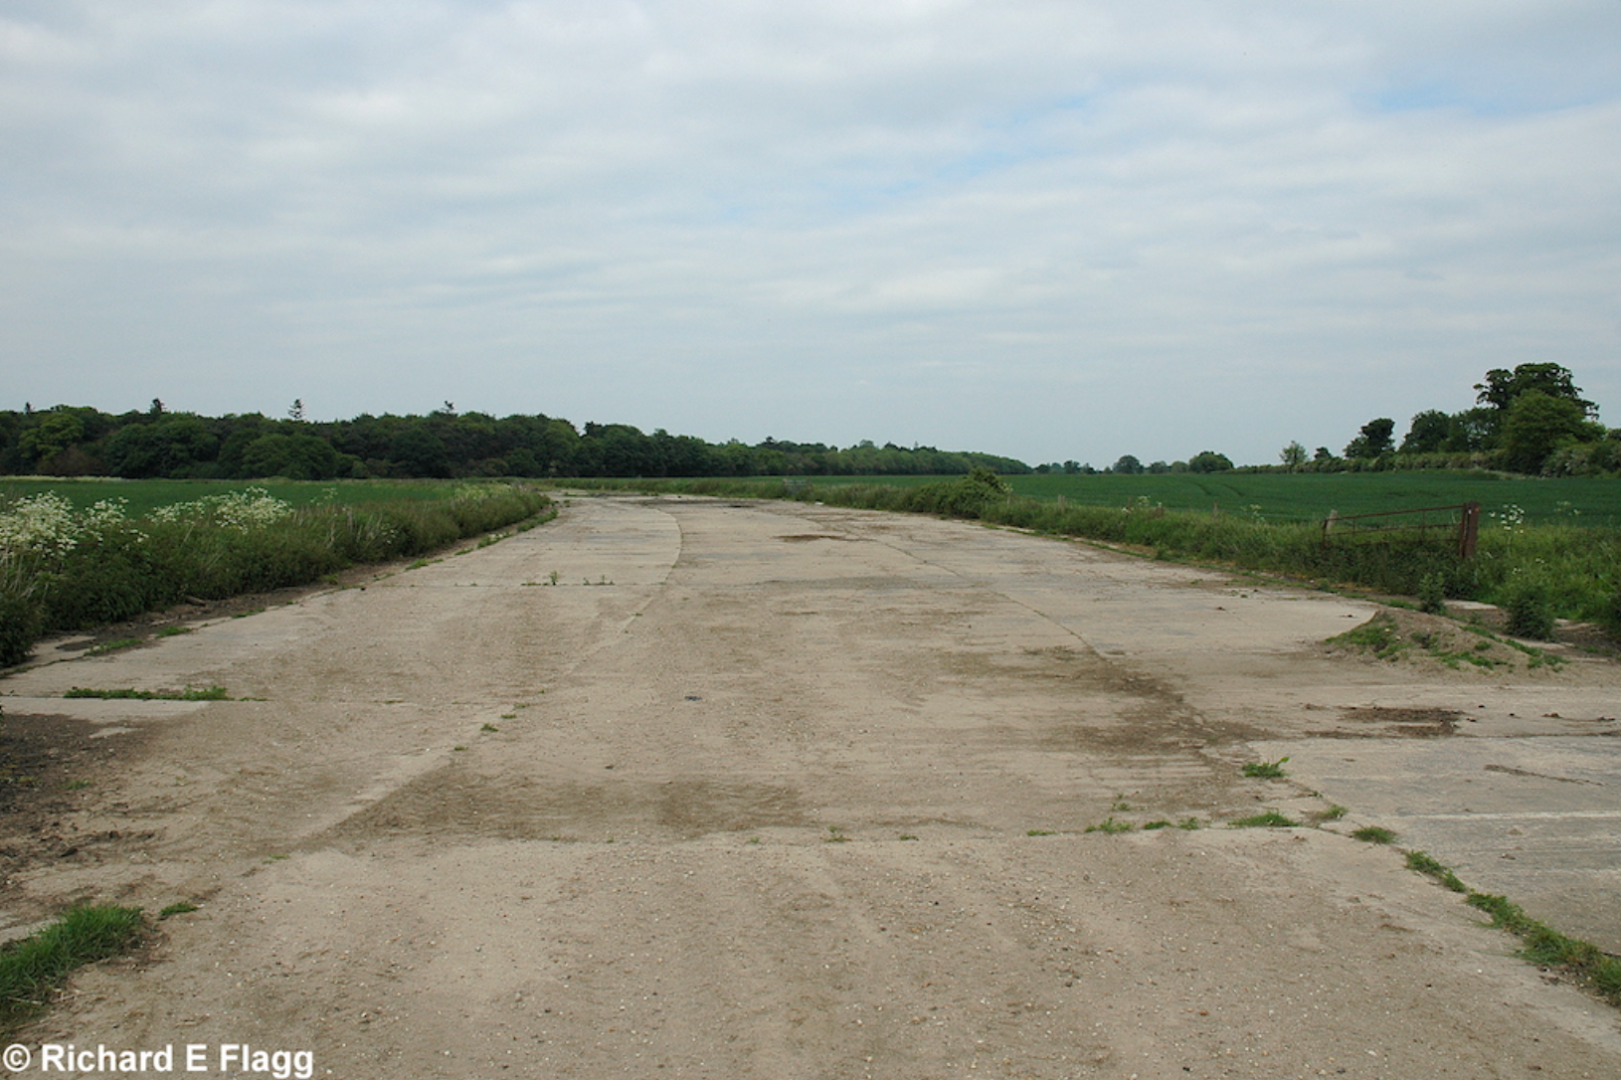 013Taxiway at the south east of the airfield. Looking north east towards the runway 29 threshold - 23 May 2007.png